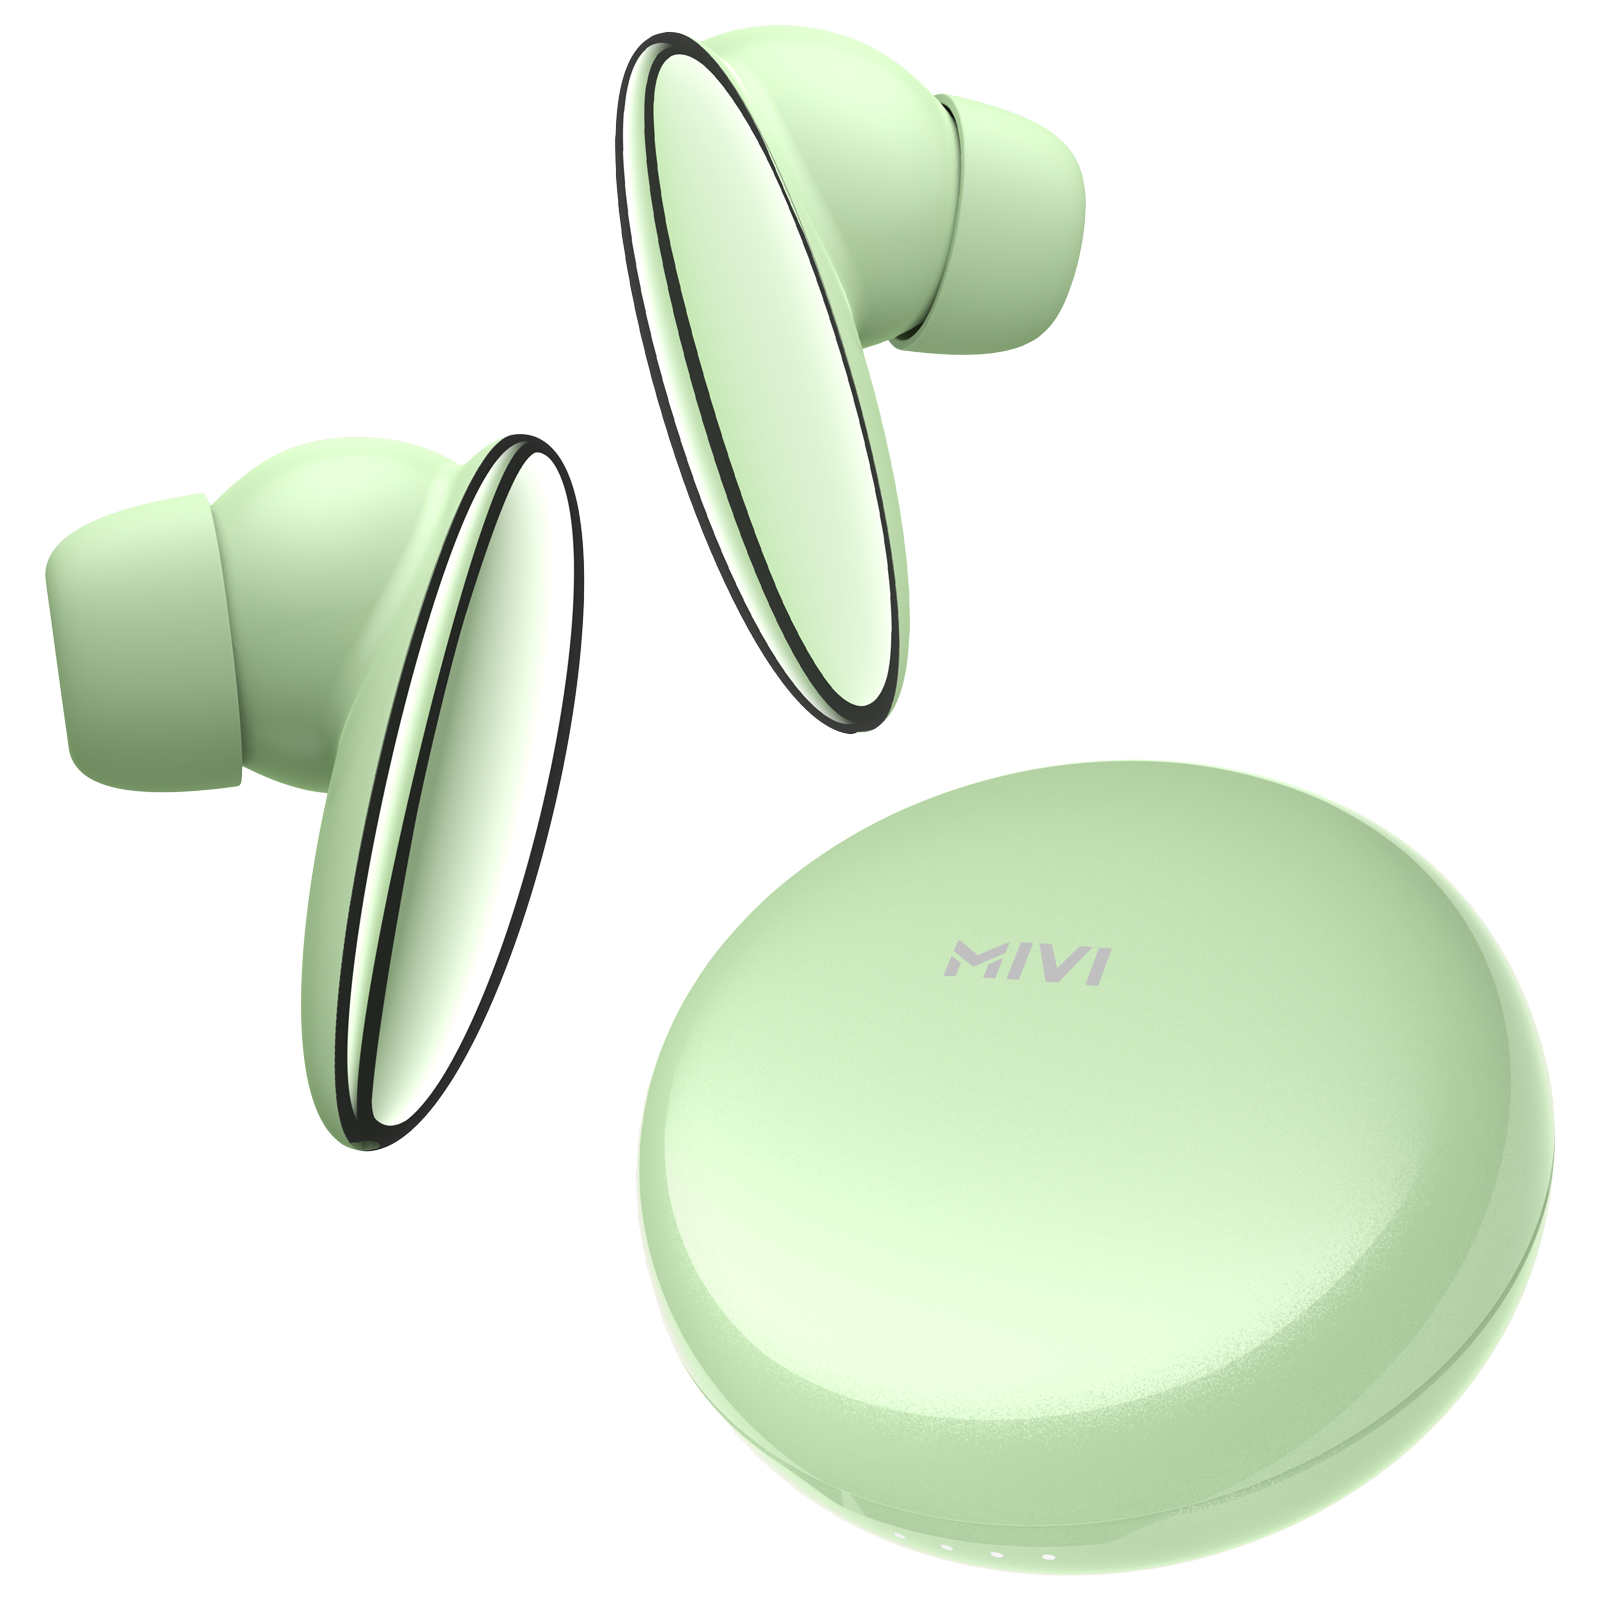 Mivi DuoPods N6 TEDPN6MG TWS Earbuds with AI Noise Cancellation (IPX4 Water Resistant, 13mm Electroplated Drivers, Mint Green)